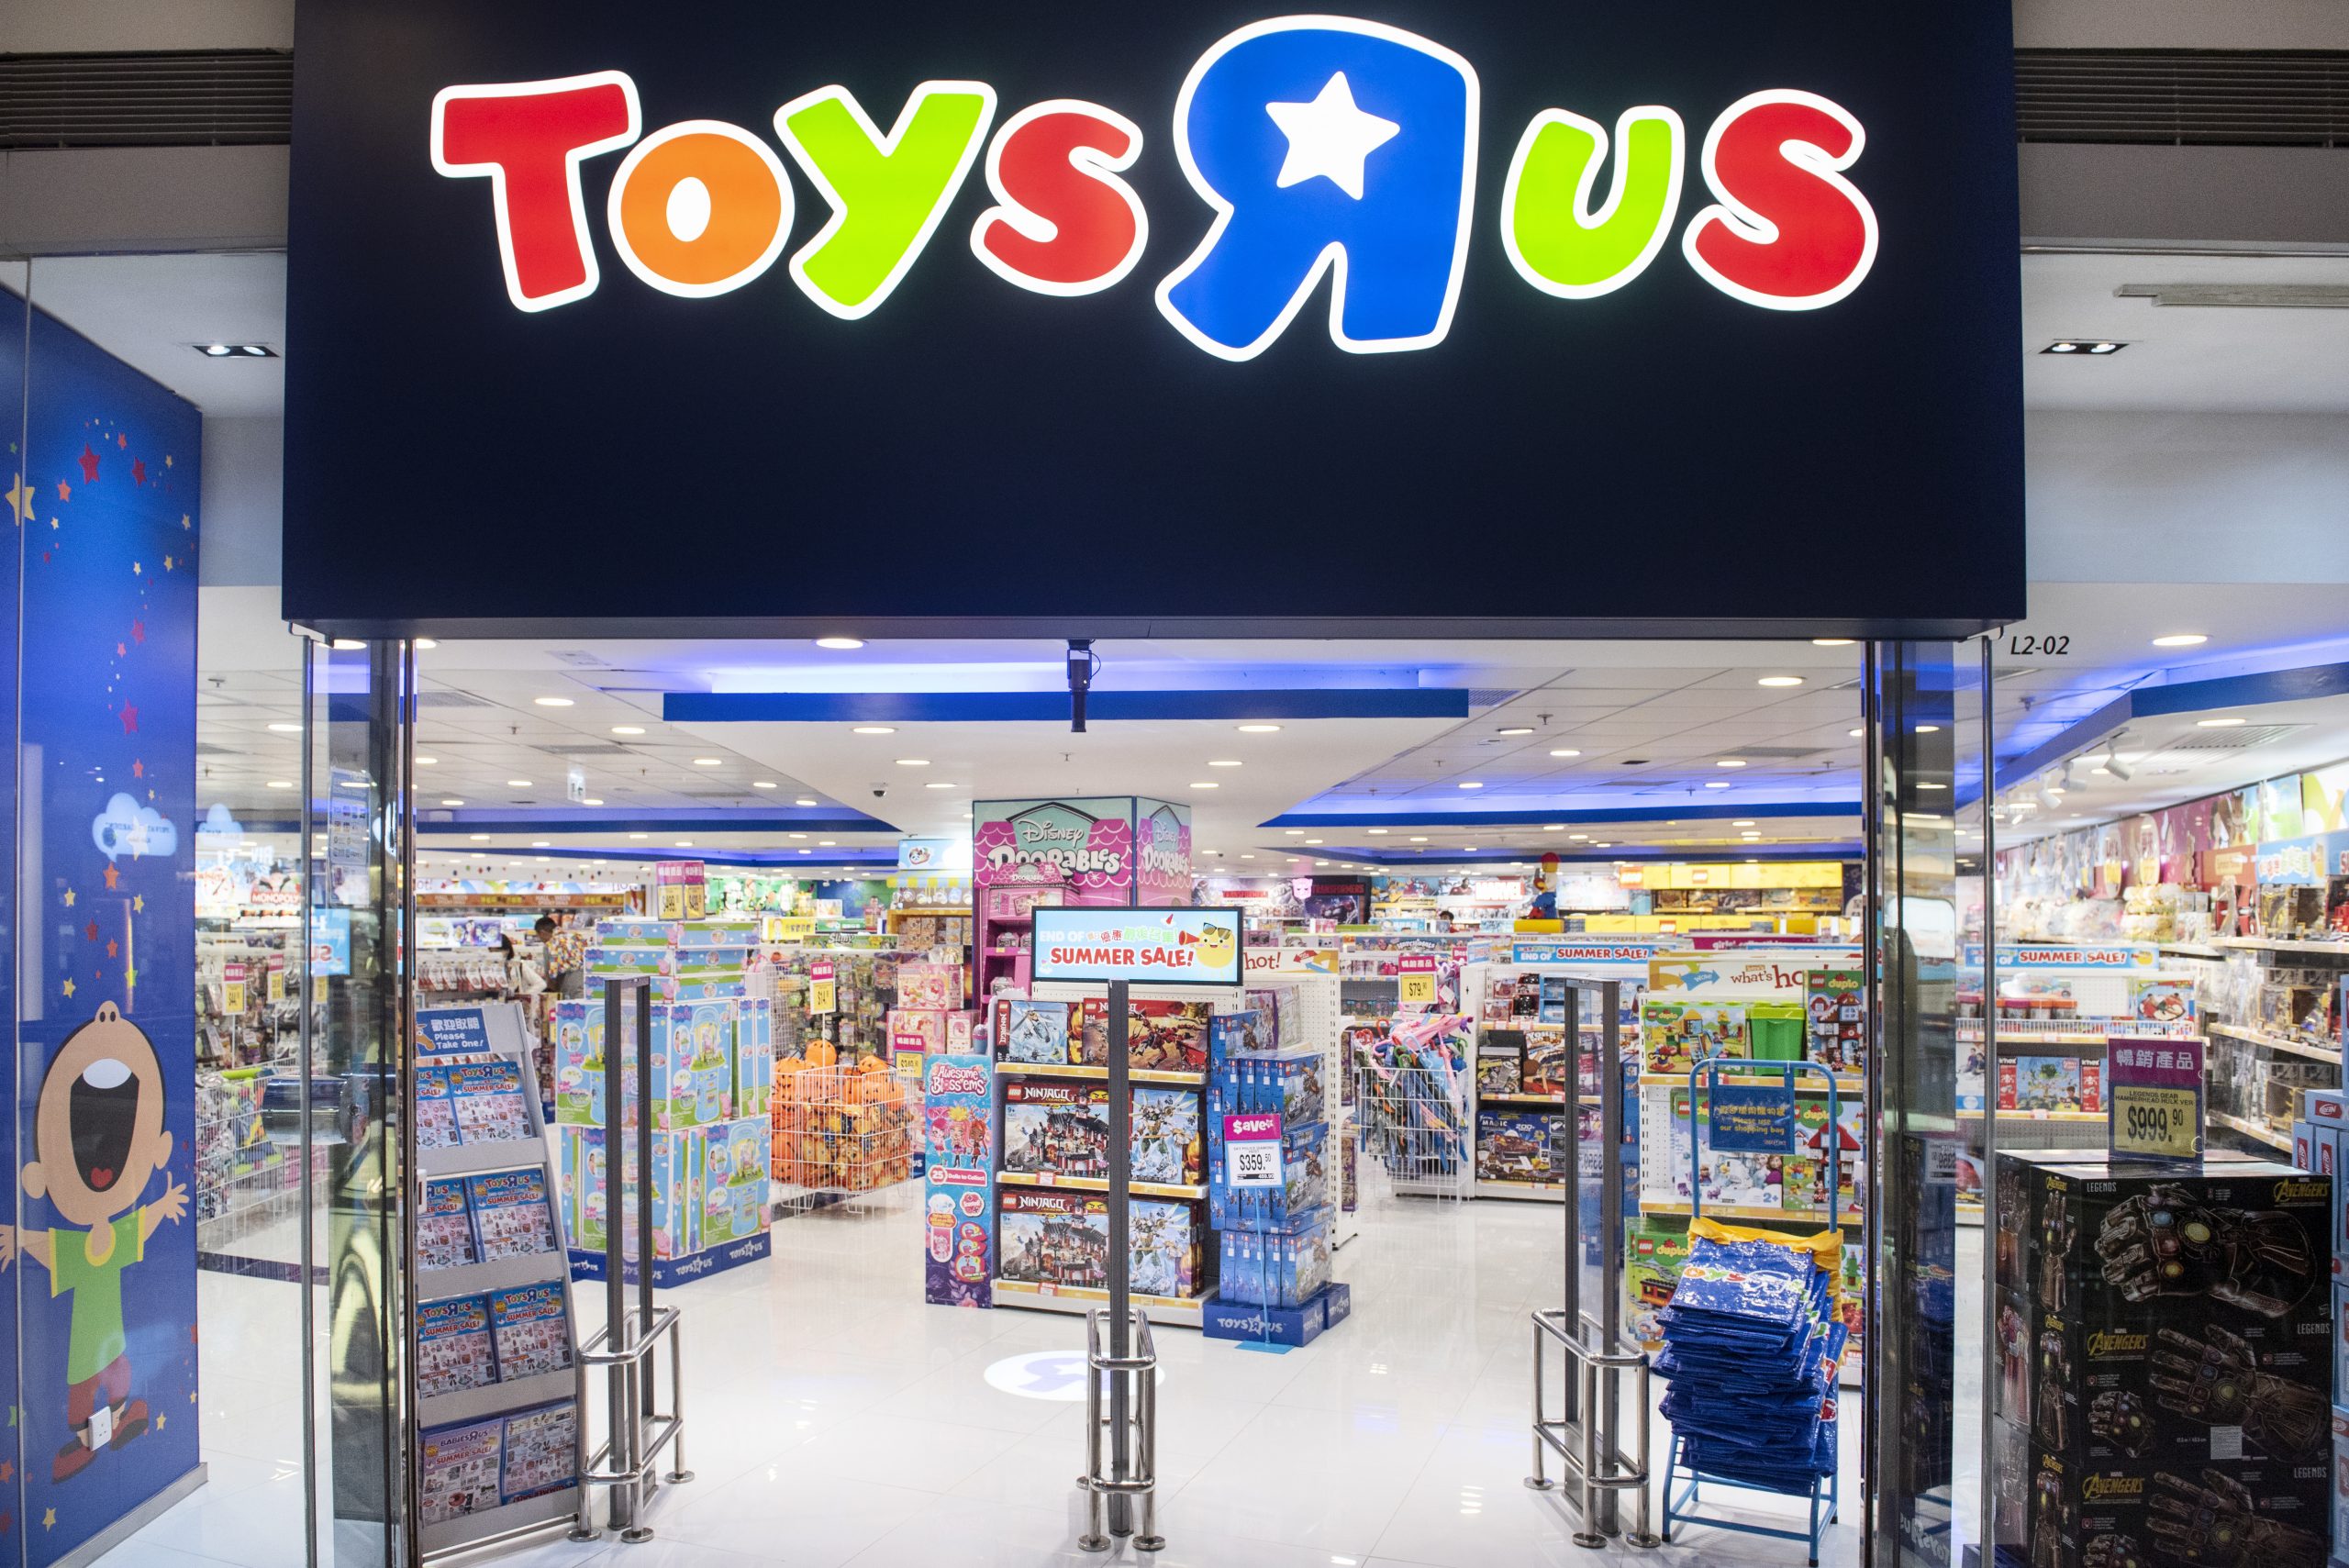 Toys R Us: New Stores Open Before Black Friday in NJ, Texas | Money